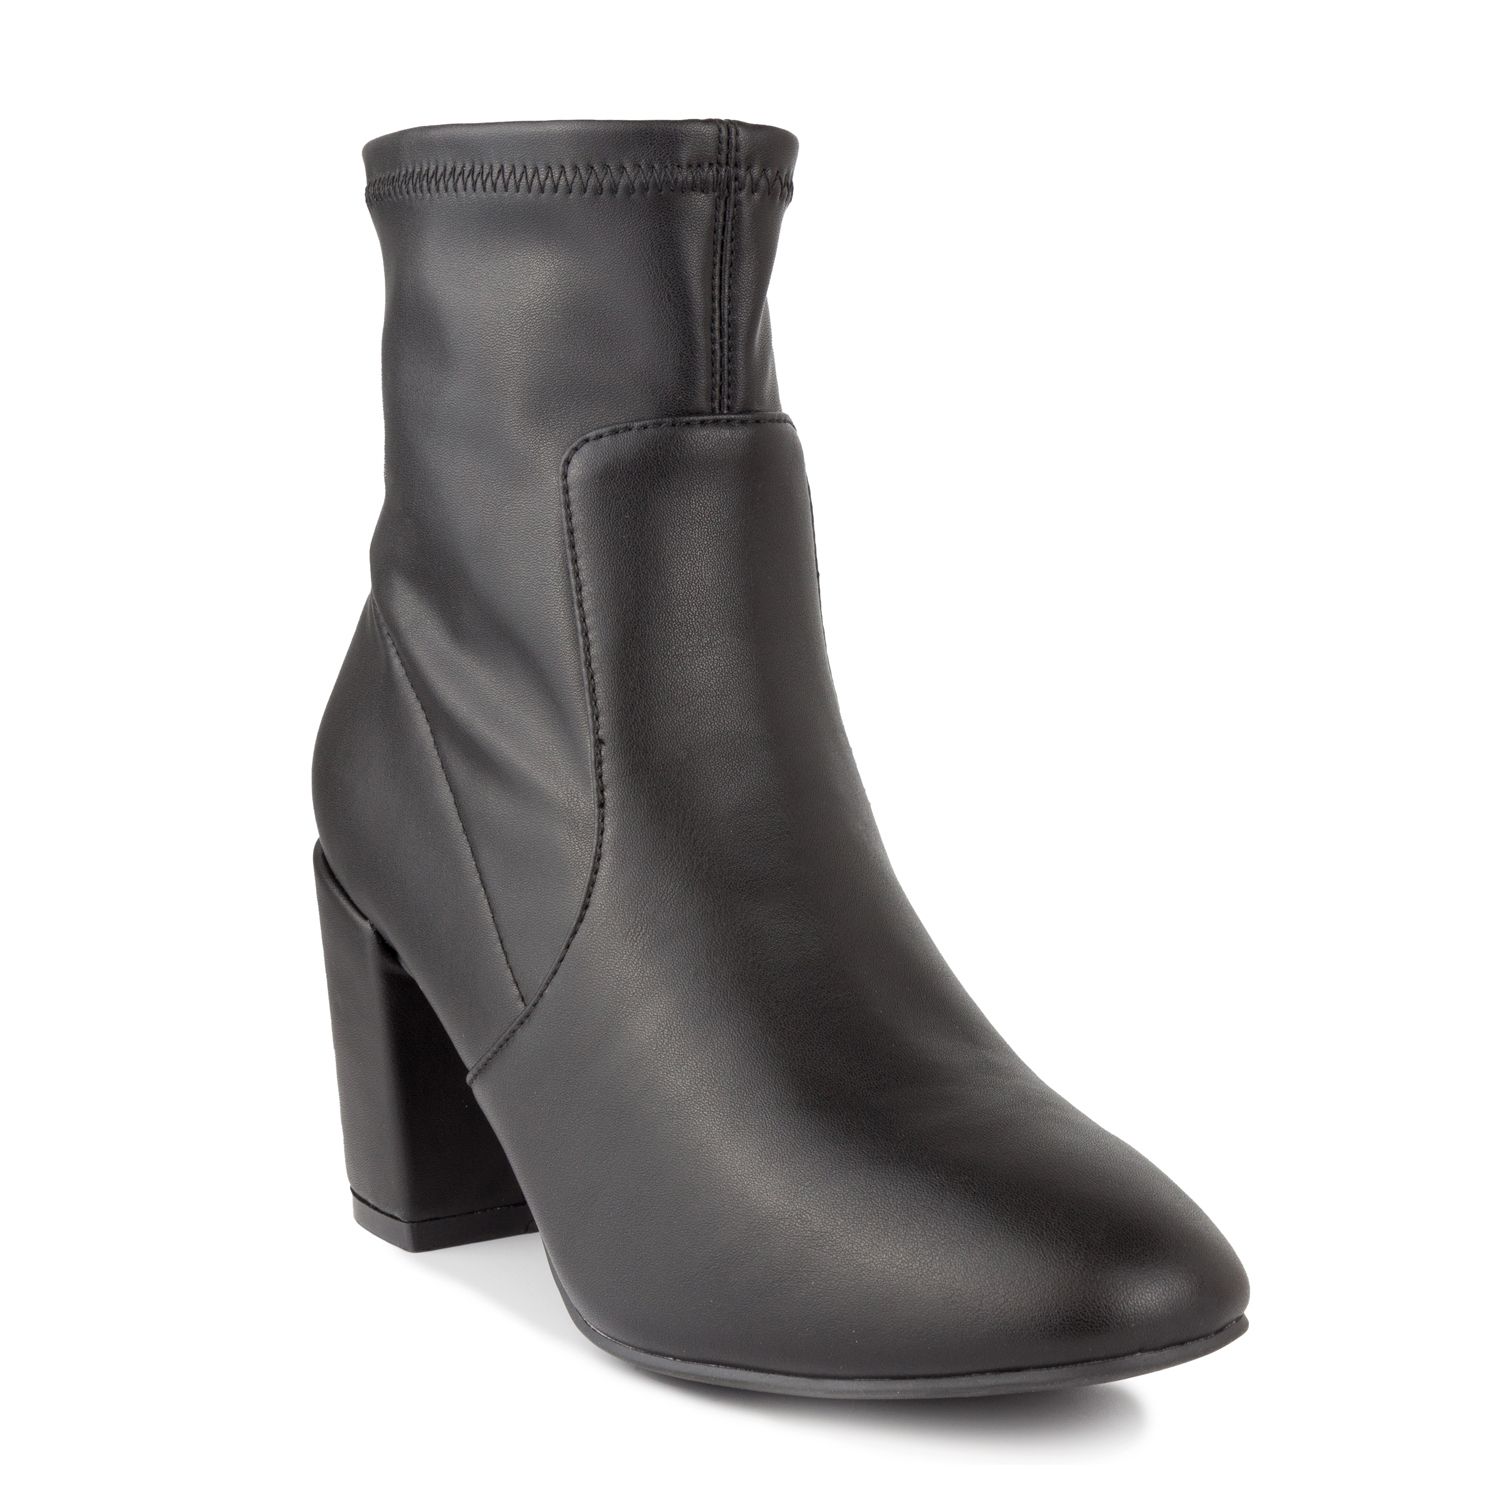 black stretch ankle boots